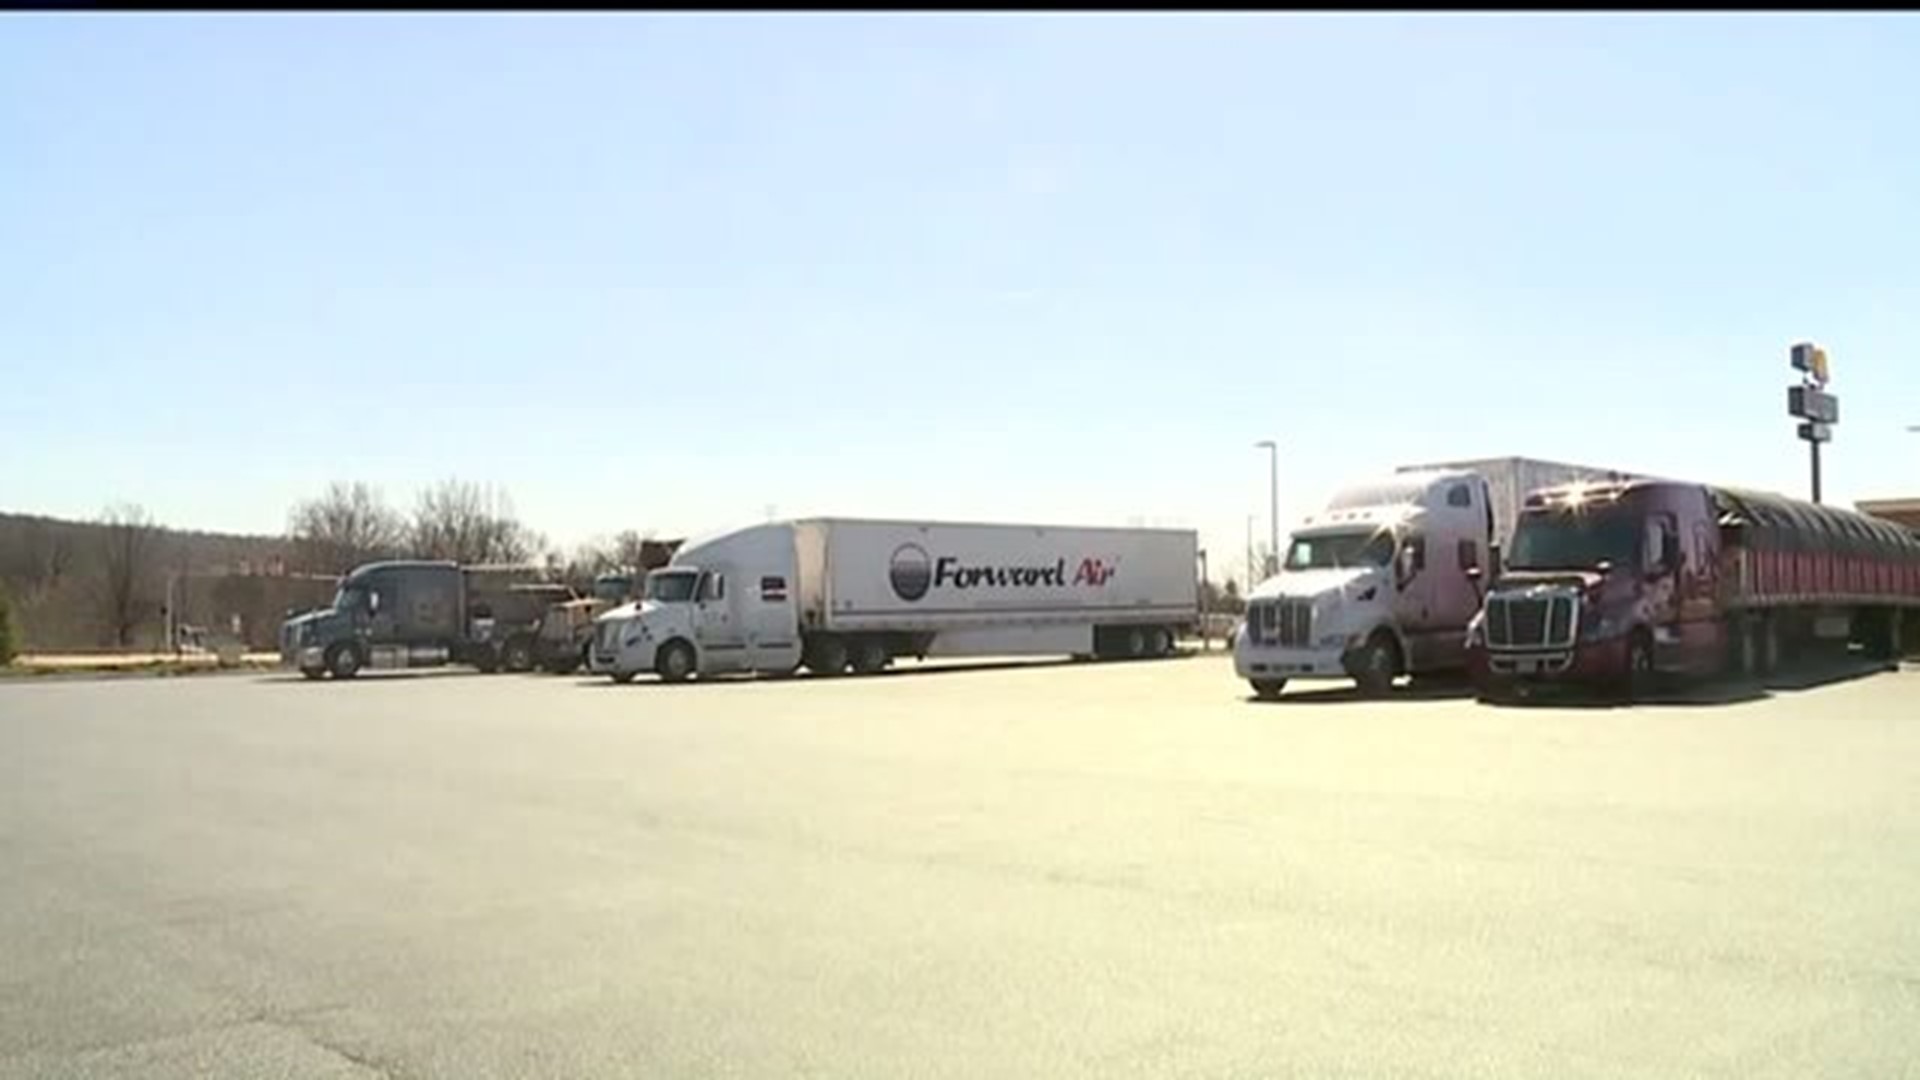 Truck drivers and PennDOT working to combat sex trafficking in Pennsylvania